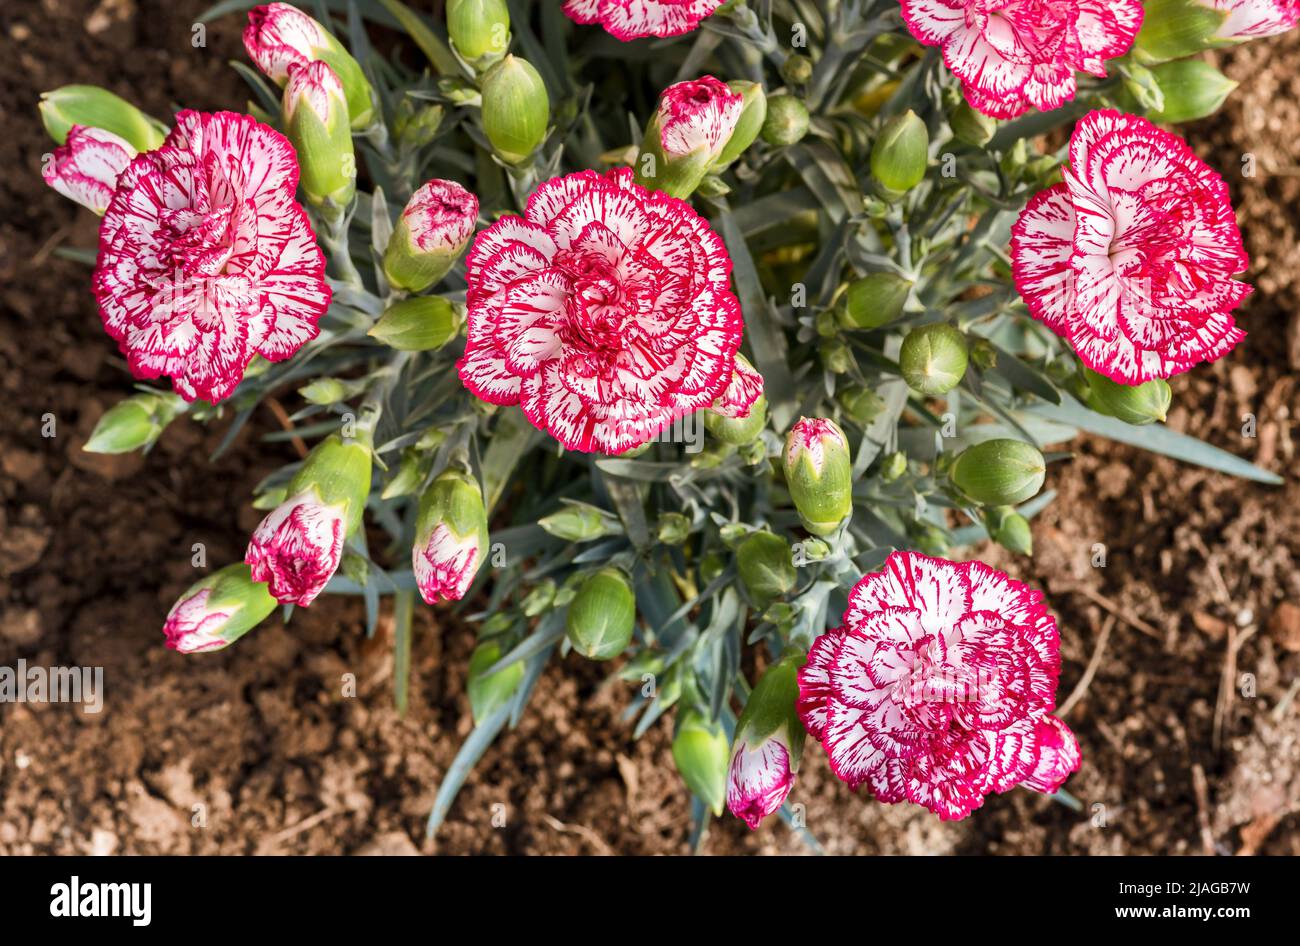 Pink and white dianthus caryophyllus flowers bouquet. Stock Photo